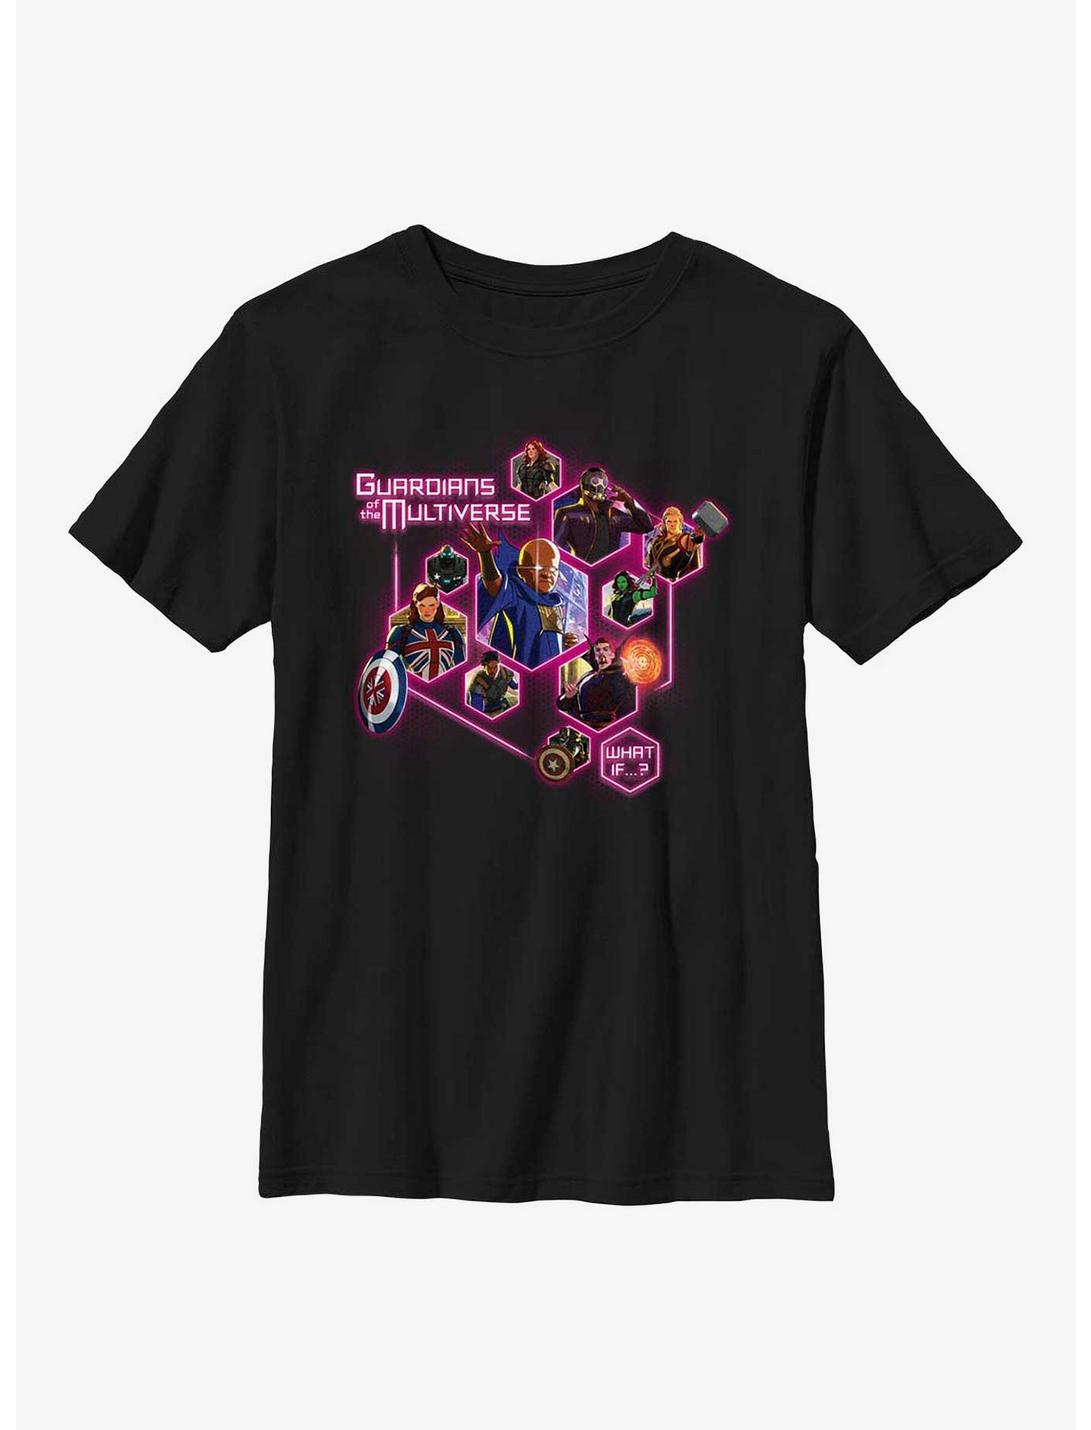 Plus Size Marvel What If?? Guardians Of The Multiverse Pods Youth T-Shirt, BLACK, hi-res